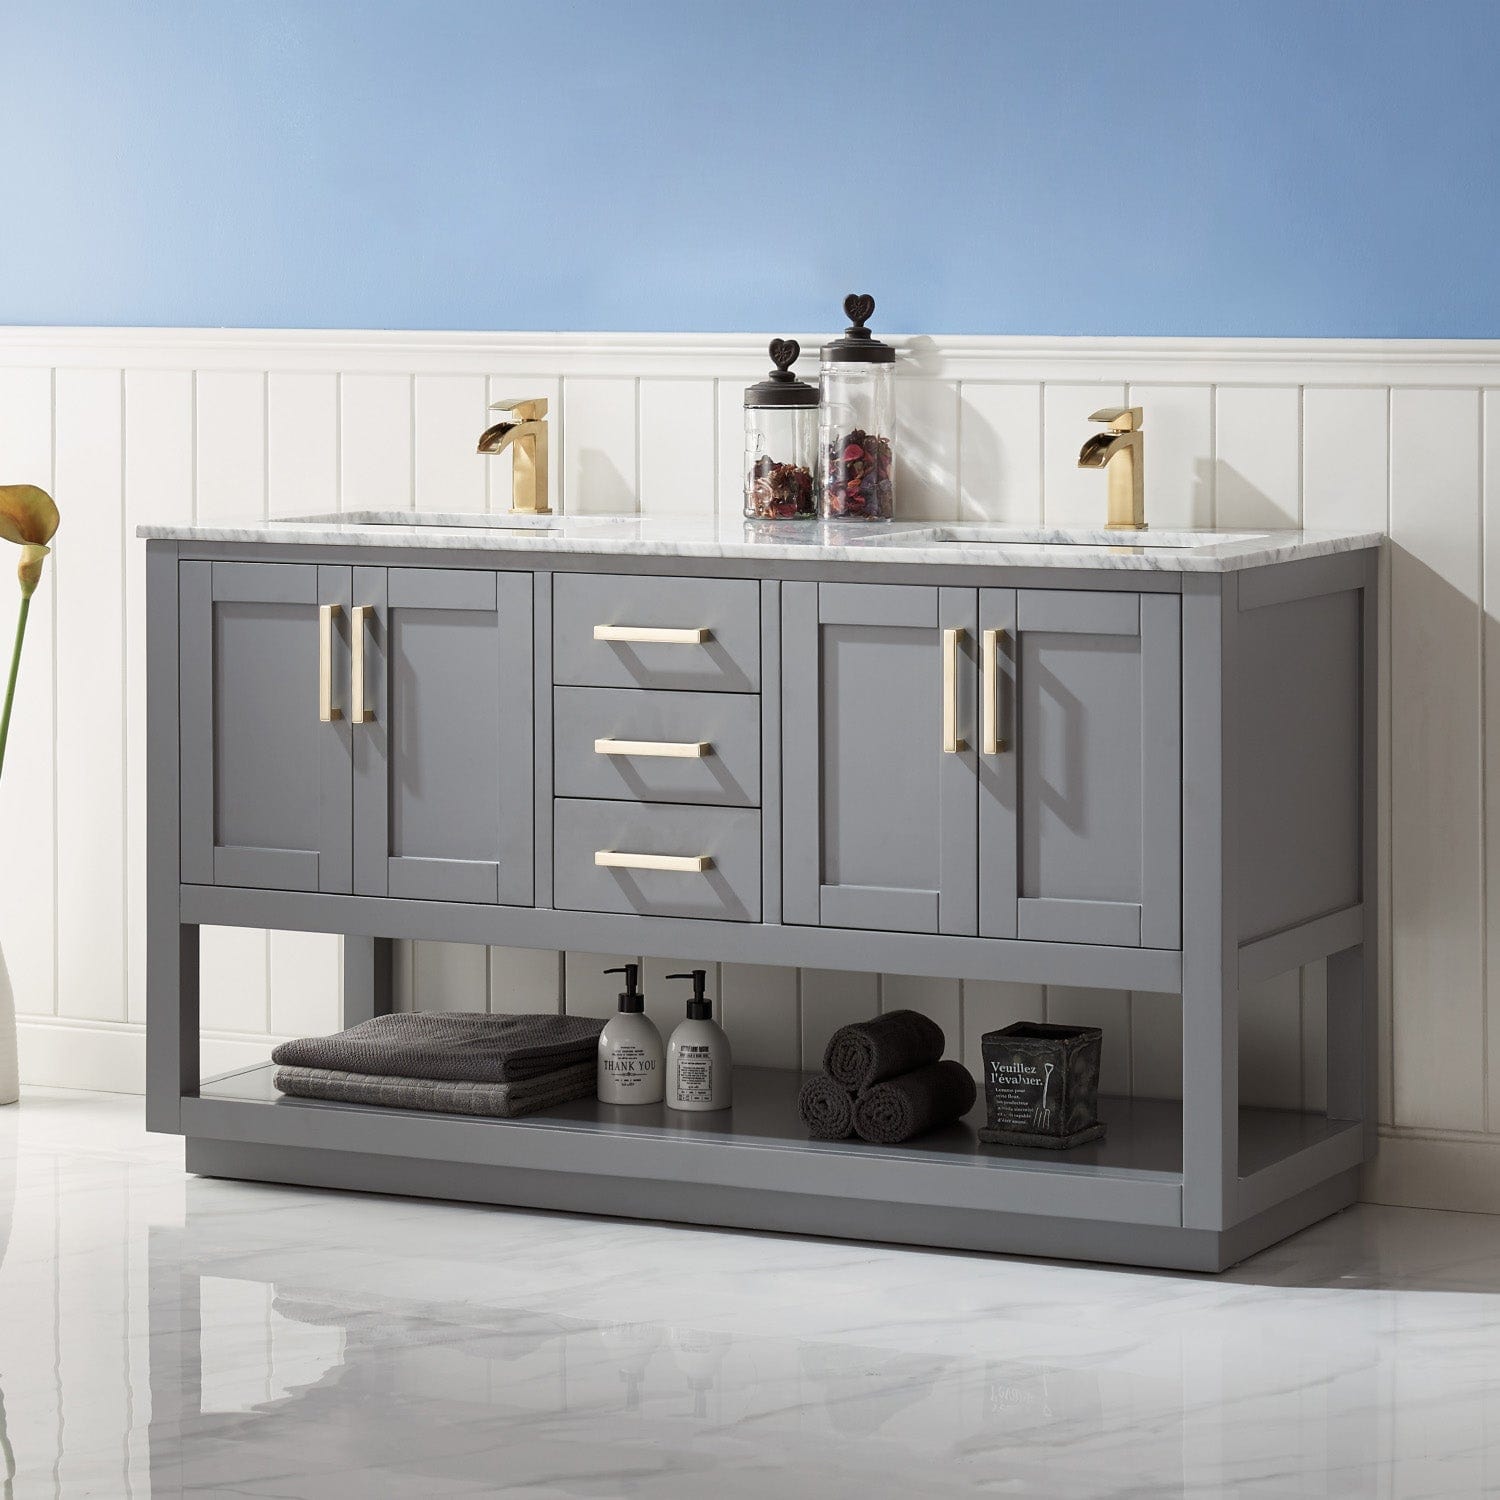 Altair Remi 60" Double Bathroom Vanity Set in Gray and Carrara White Marble Countertop without Mirror 532060-GR-CA-NM - Molaix631112971522Vanity532060-GR-CA-NM